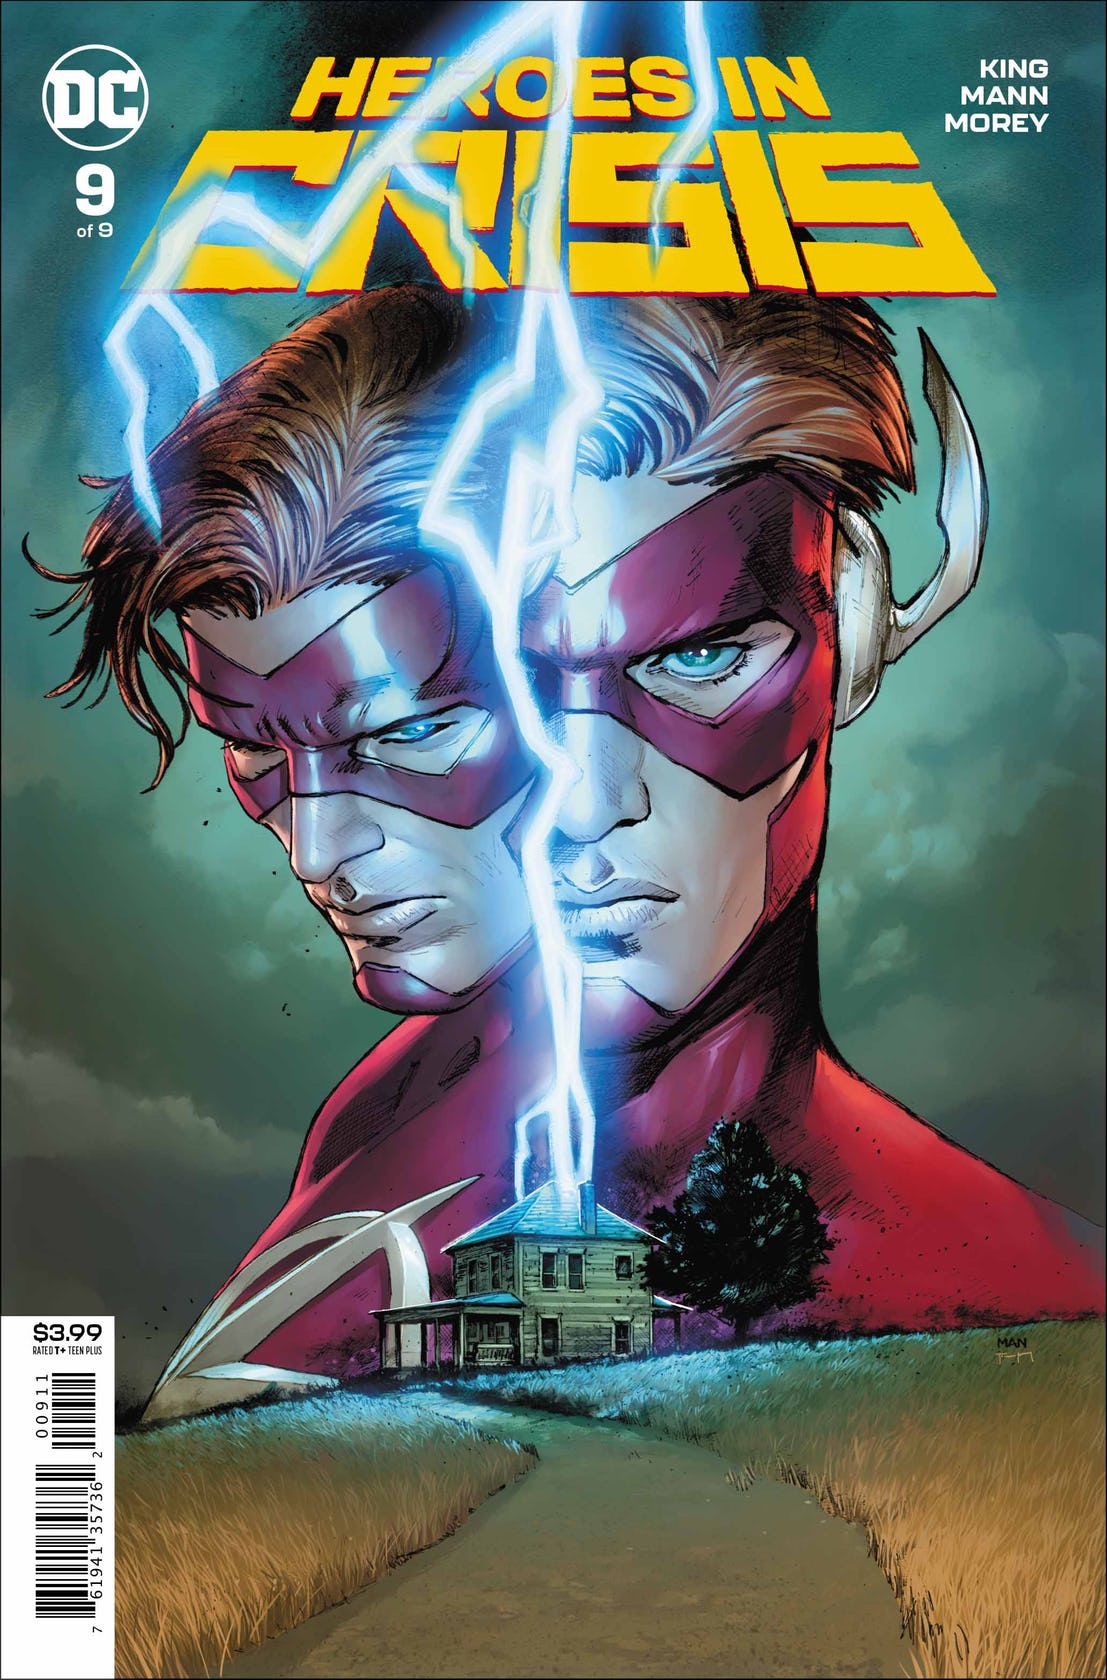 Heroes in Crisis #9 Review: Fast casualty